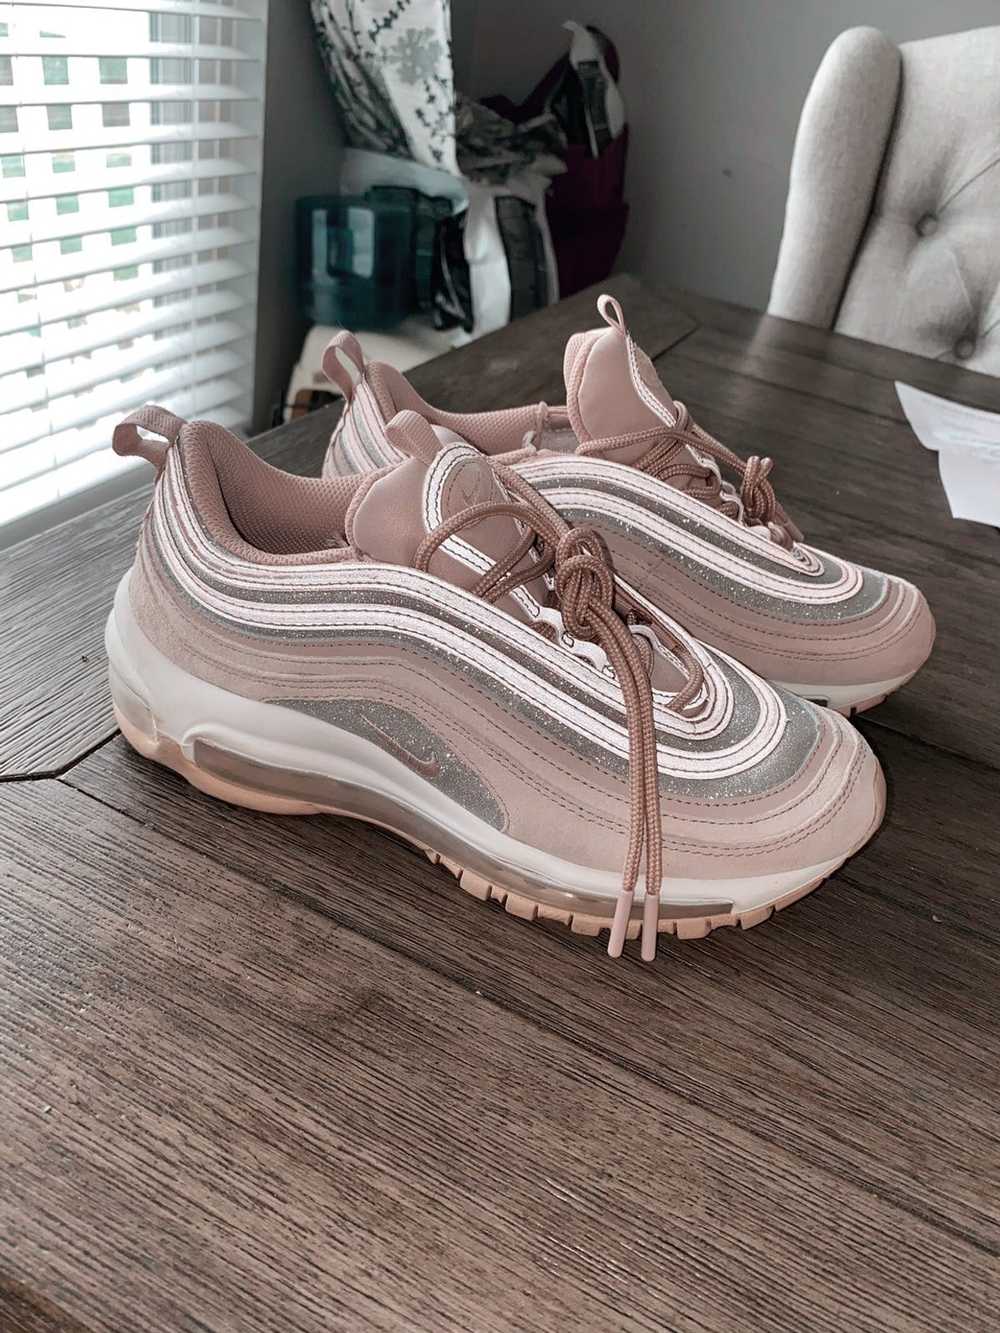 Nike Wmns Air Max 97 ‘Particle Rose’ - image 2